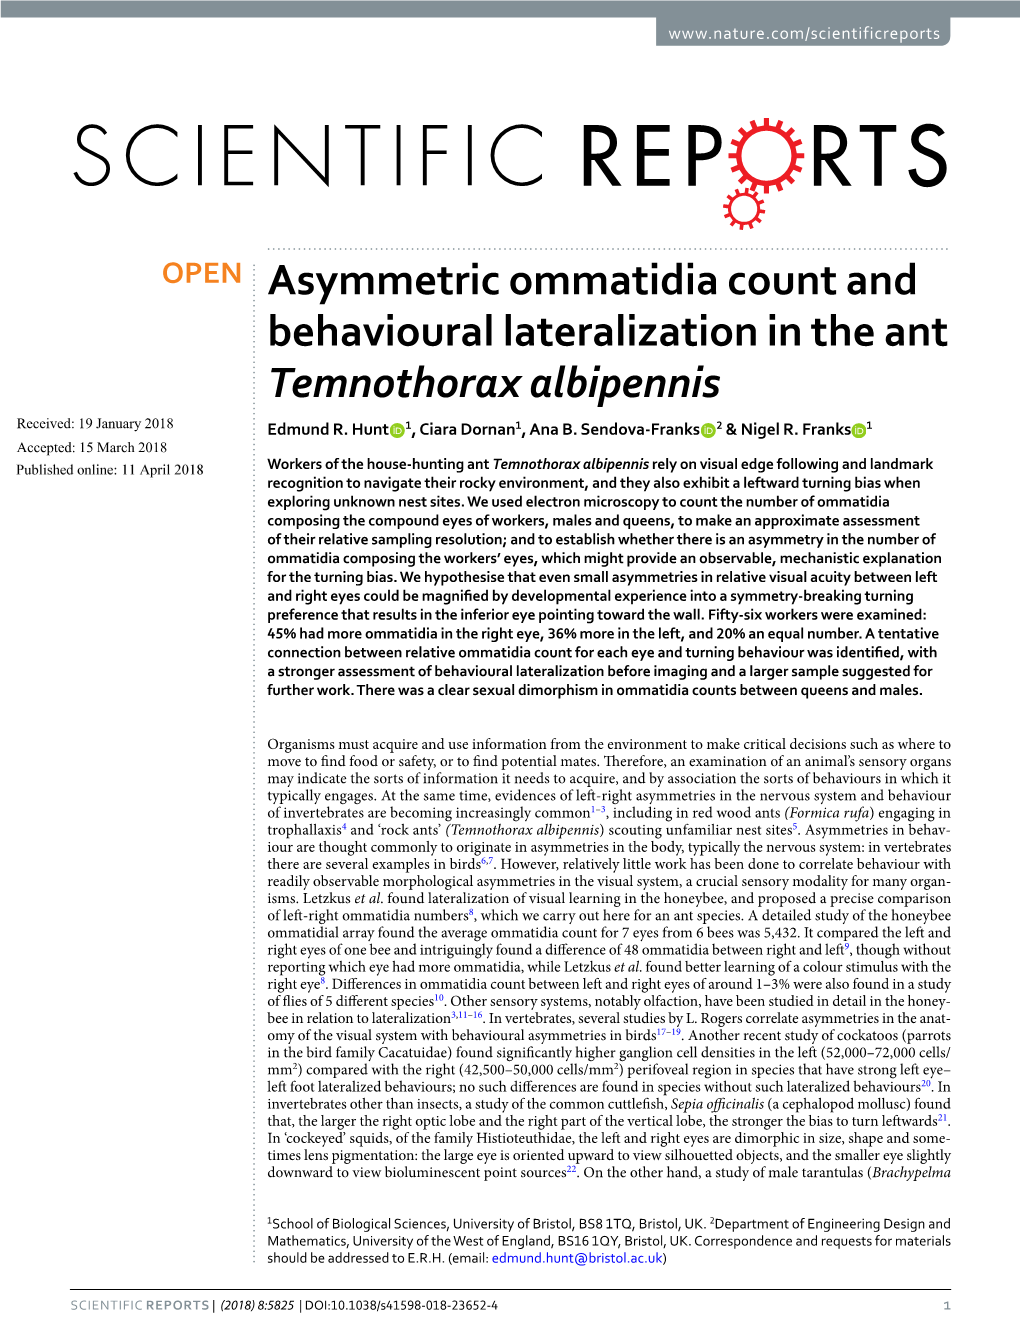 Asymmetric Ommatidia Count and Behavioural Lateralization in the Ant Temnothorax Albipennis Received: 19 January 2018 Edmund R